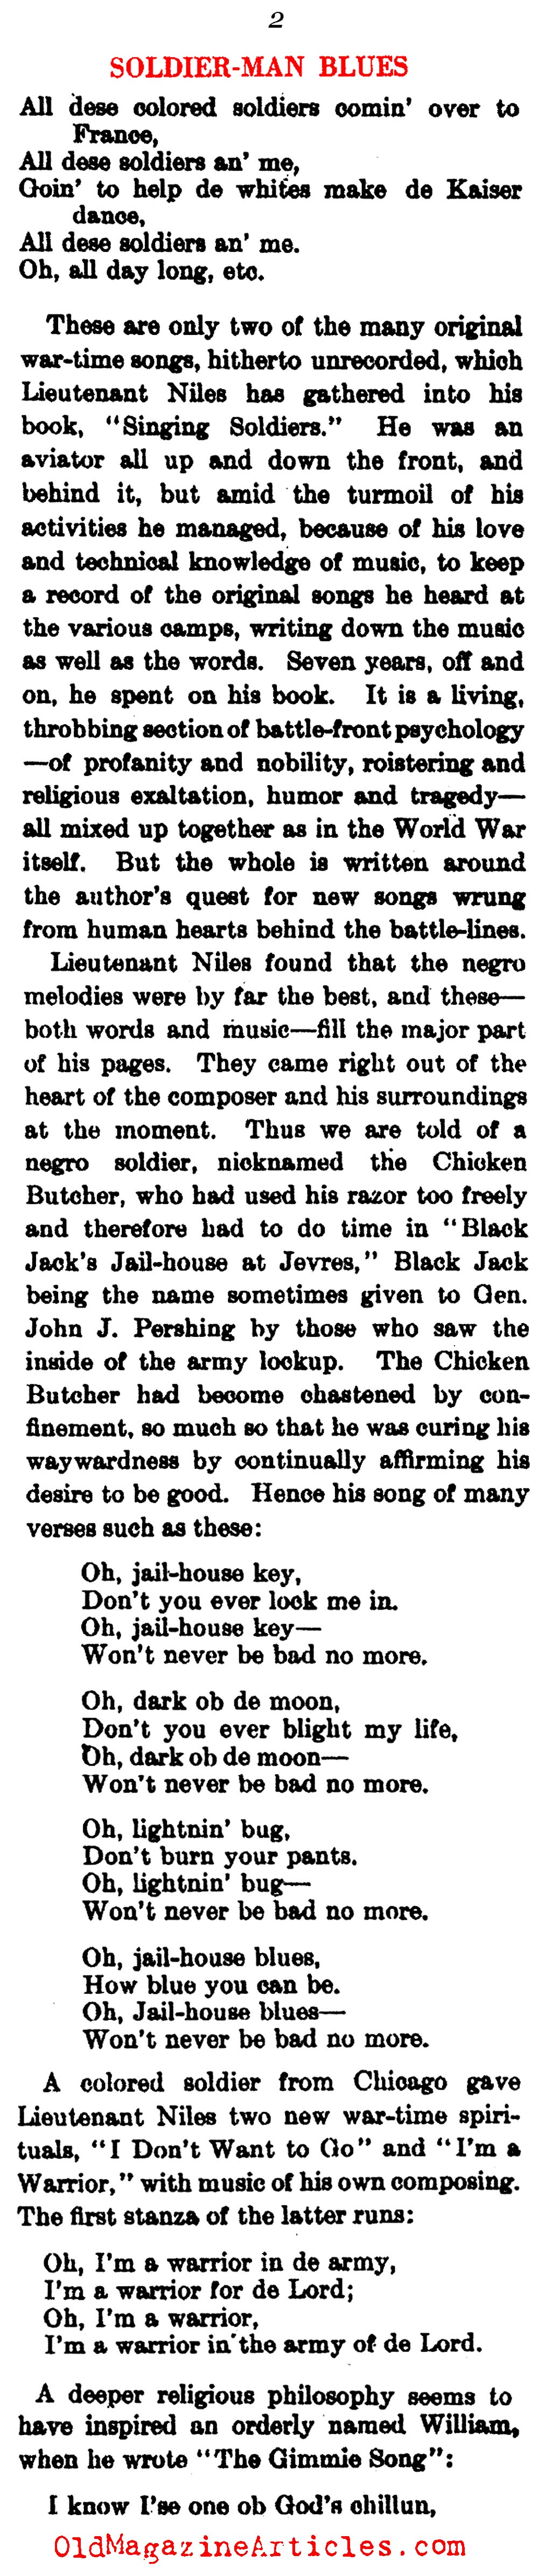 ''Soldier Man Blues from Somewhere in France'' (Literary Digest, 1927)